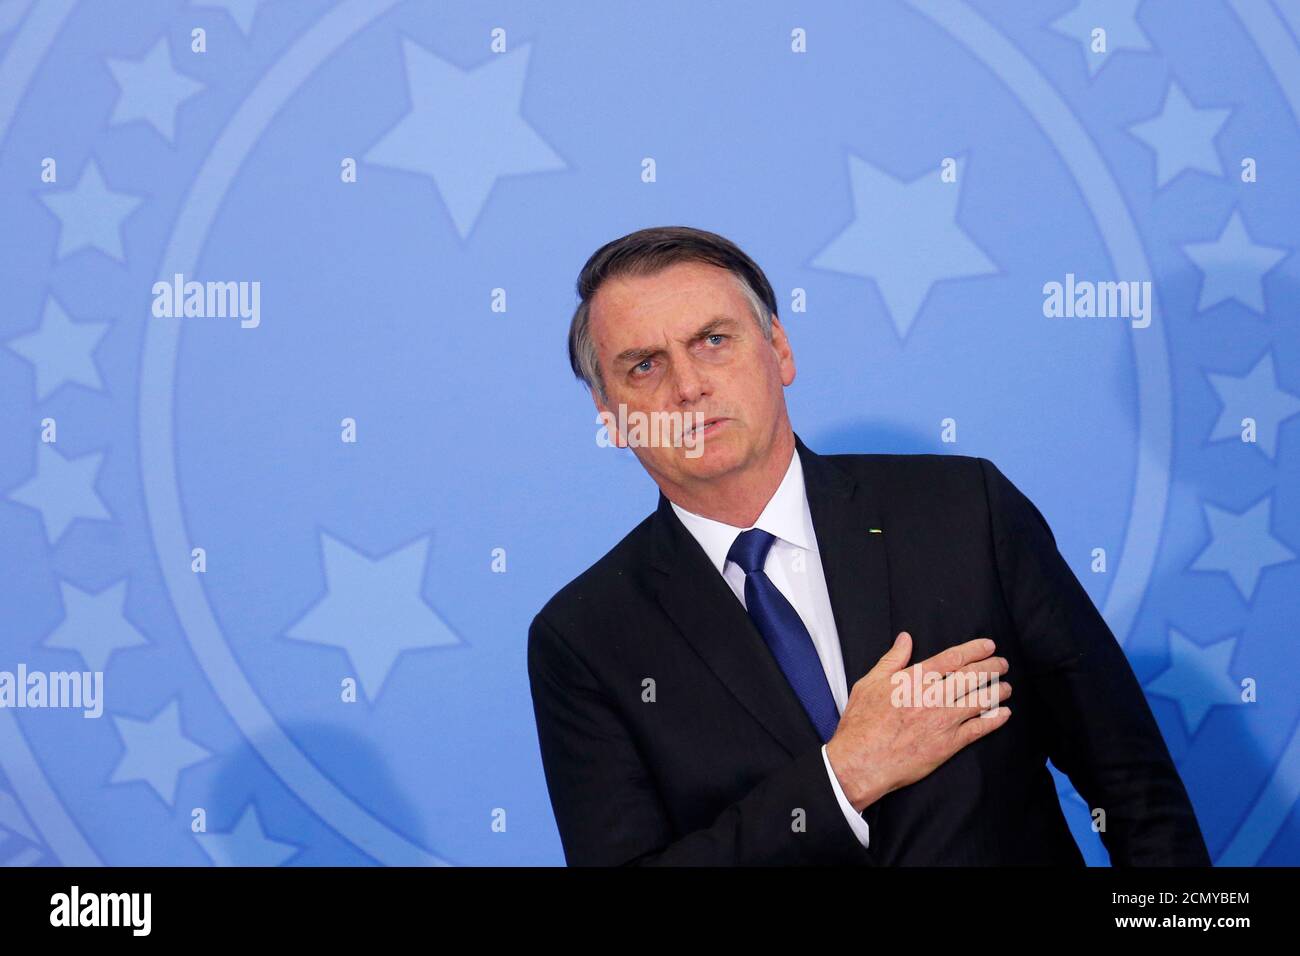 Brazil's President Jair Bolsonaro attends a ceremony for signature of the decree of the new regulation on the use, sale and carrying of weapons and ammunition, at Planalto Palace in Brasilia, Brazil May 7, 2019. REUTERS/Adriano Machado Stock Photo